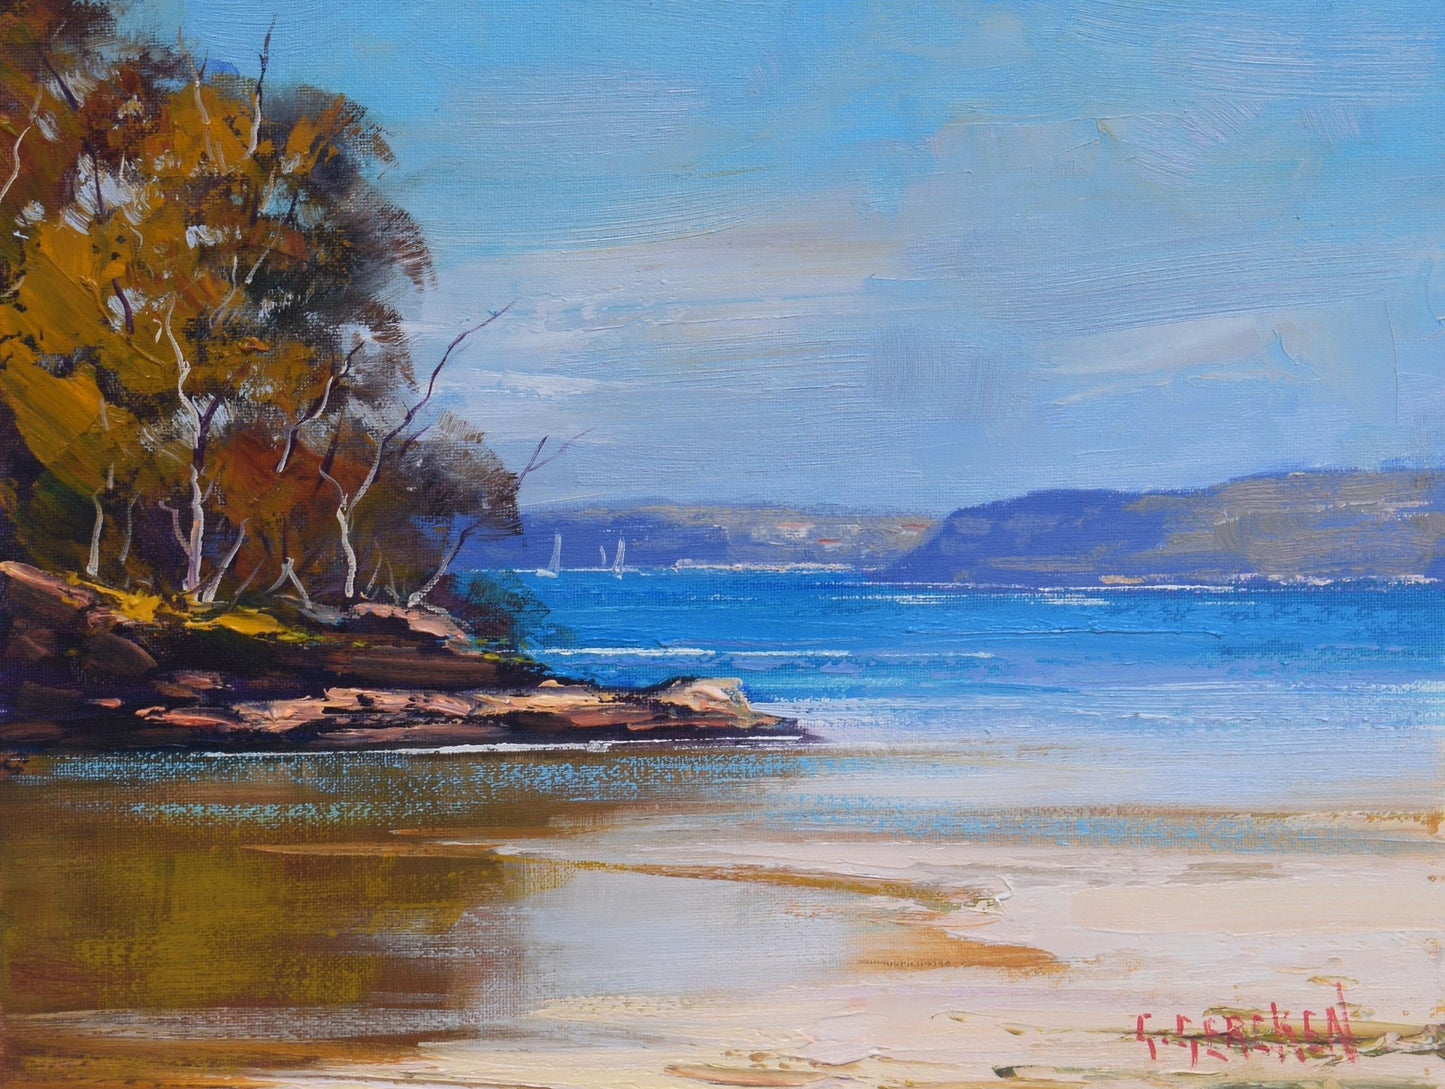 FRAMED ORIGINAL OIL PAINTING BEAUTIFUL EXPRESSIVE SEASCAPE COLLINS BEACH SYDNEY HARBOUR BY GRAHAM GERCKEN